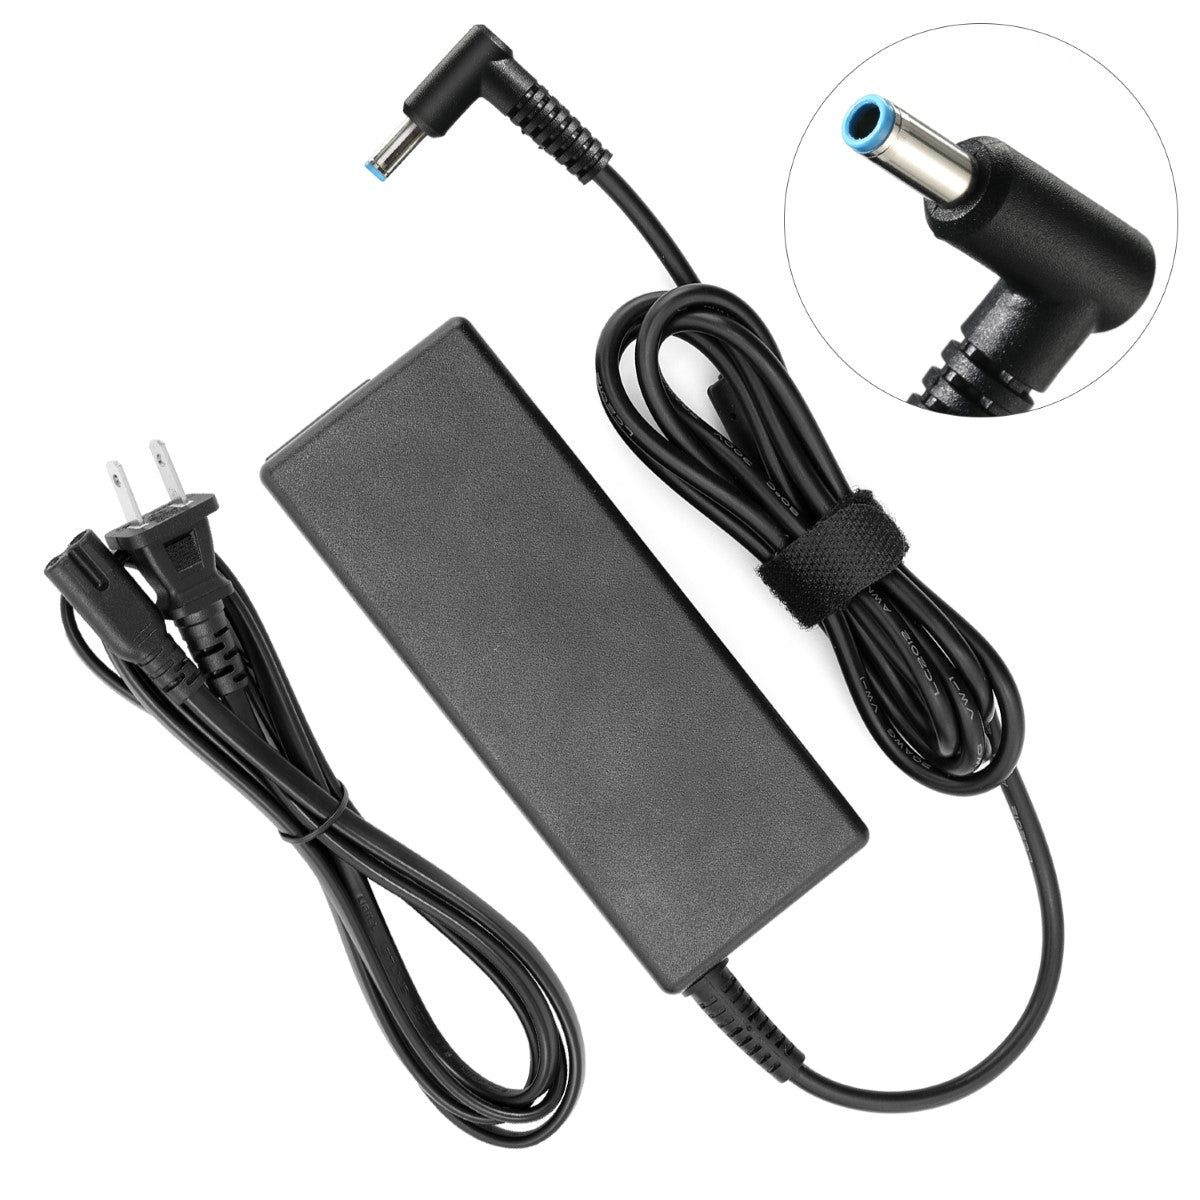 AC Adapter Charger for HP Chromebook 11-2210nr Notebook.